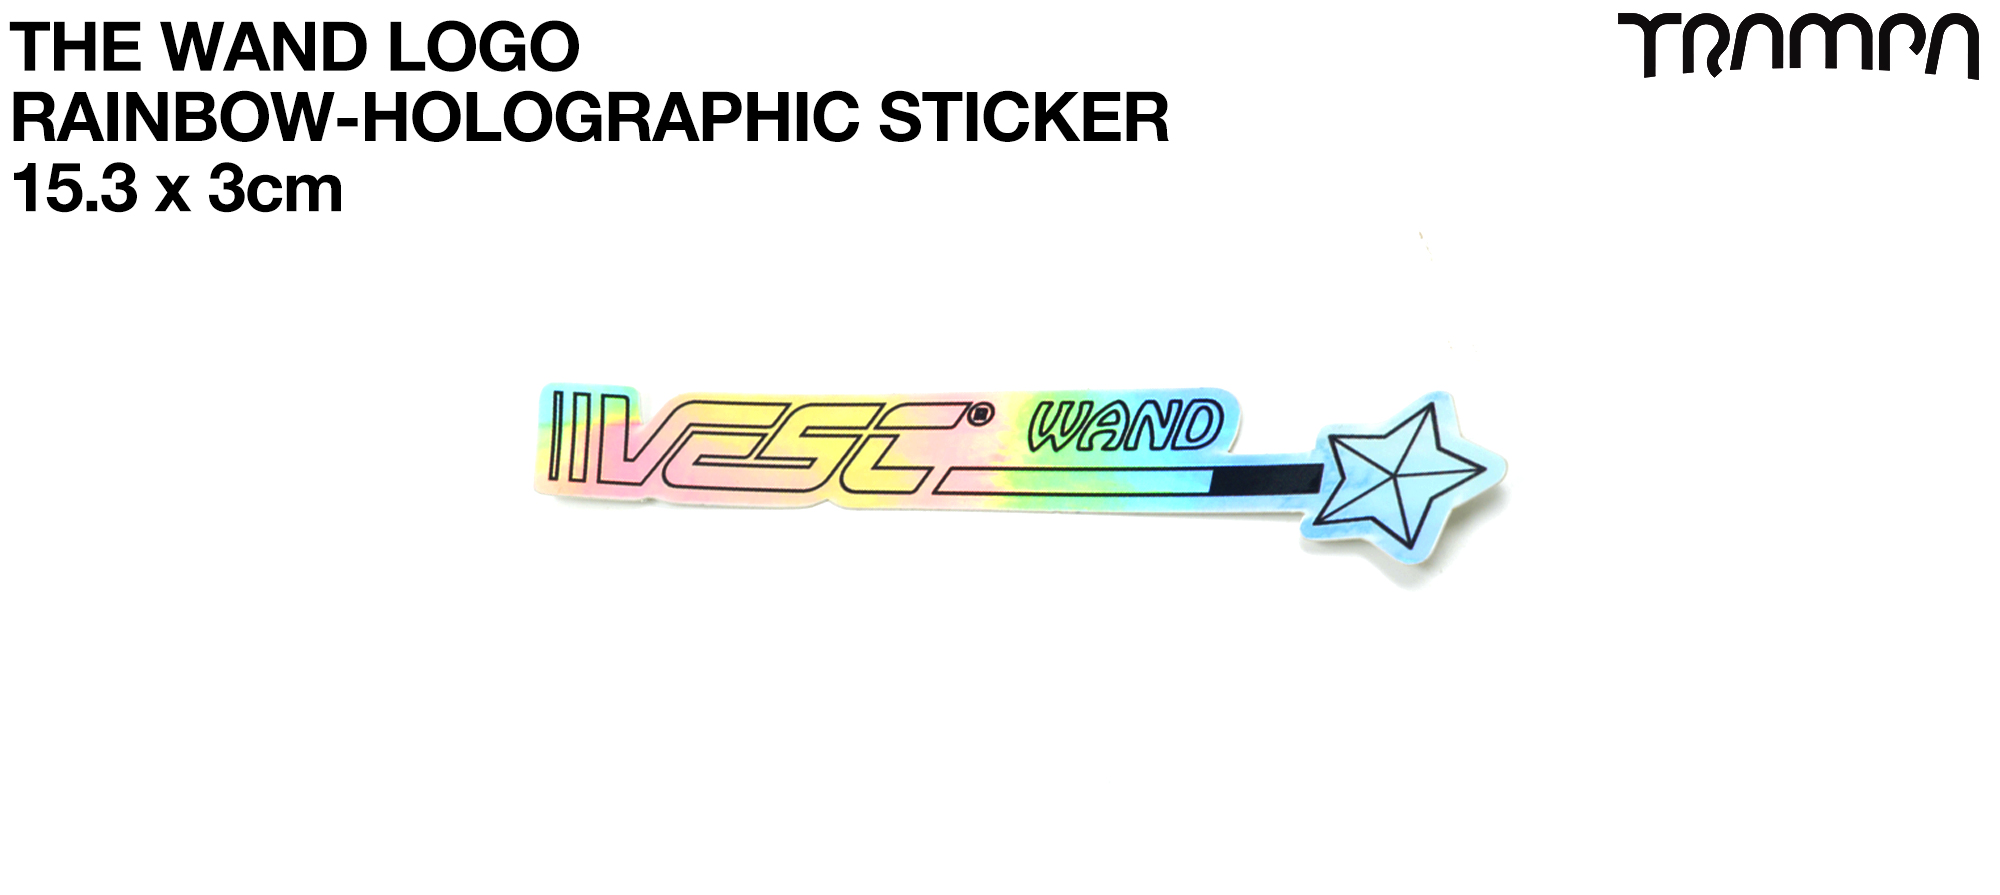 Please sell me a 3x Holographic WAND Stickers (+£1)